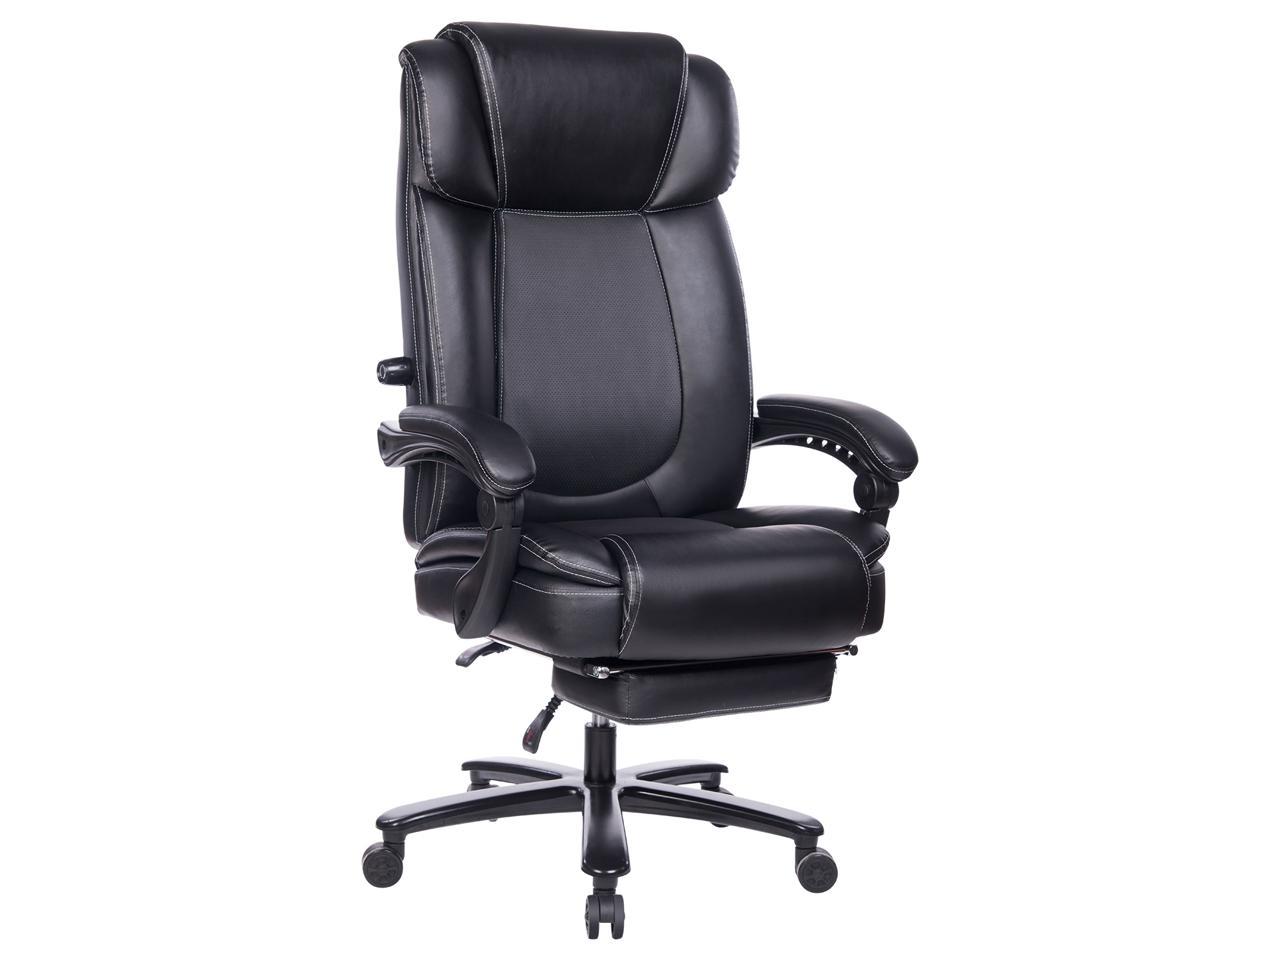 Reficcer Big And Tall Reclining Leather Office Chair Metal Base High Back Executive Computer Desk Chair With Adjustable Built In Lumbar Support Angle Recline Locking System And Footrest Black Newegg Com